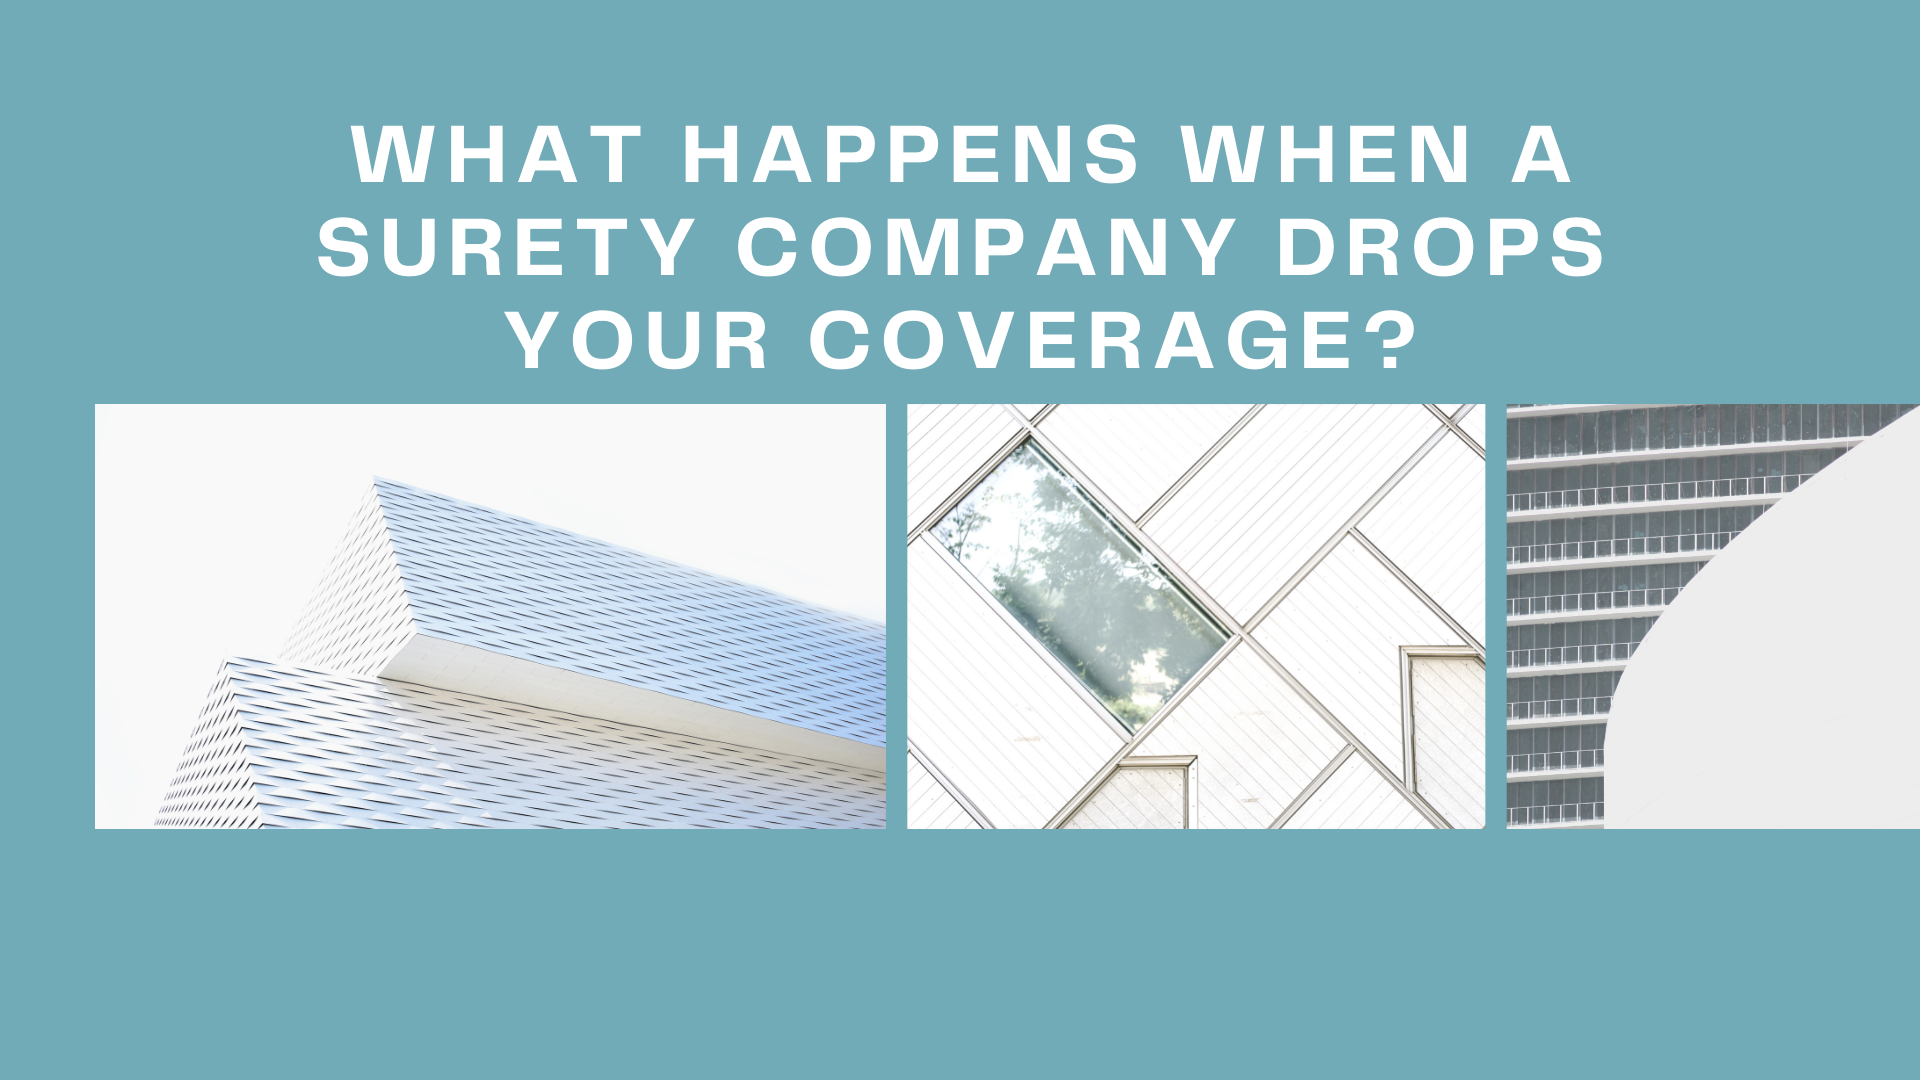 surety bond - What are the reasons a surety bond business can cancel my coverage - building exteriors